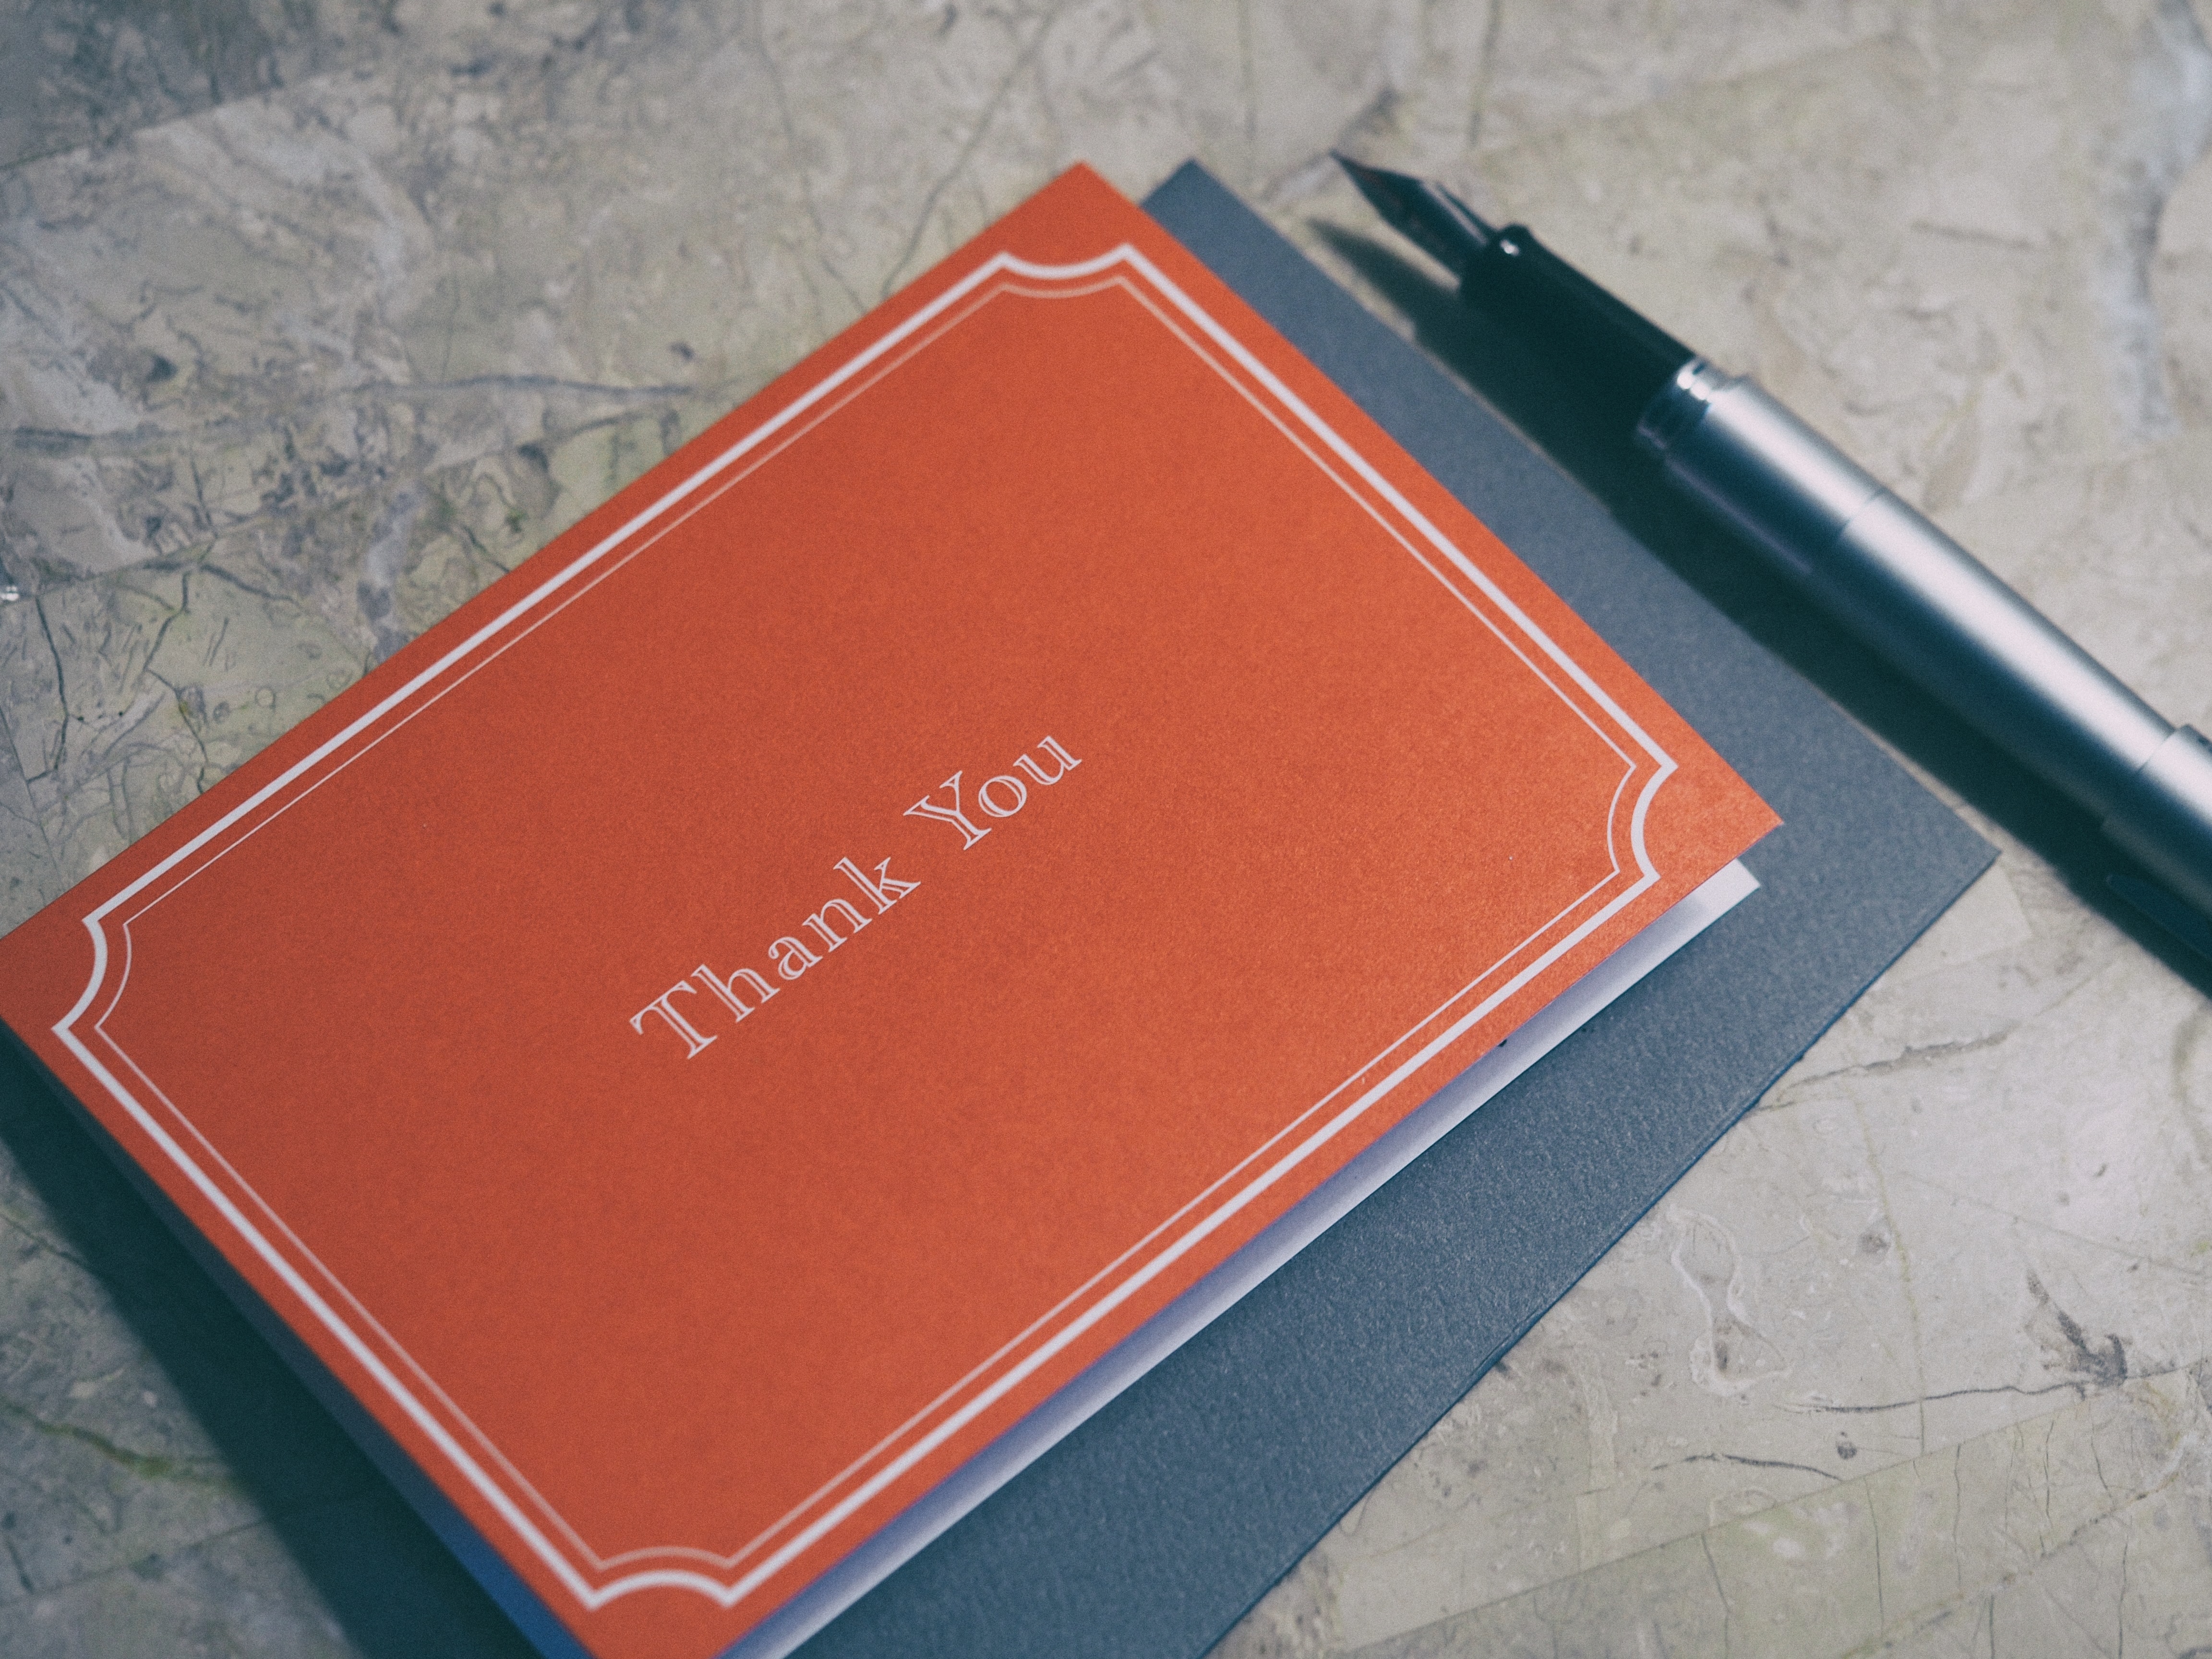 Image showing a Thank you card for the Holiday season